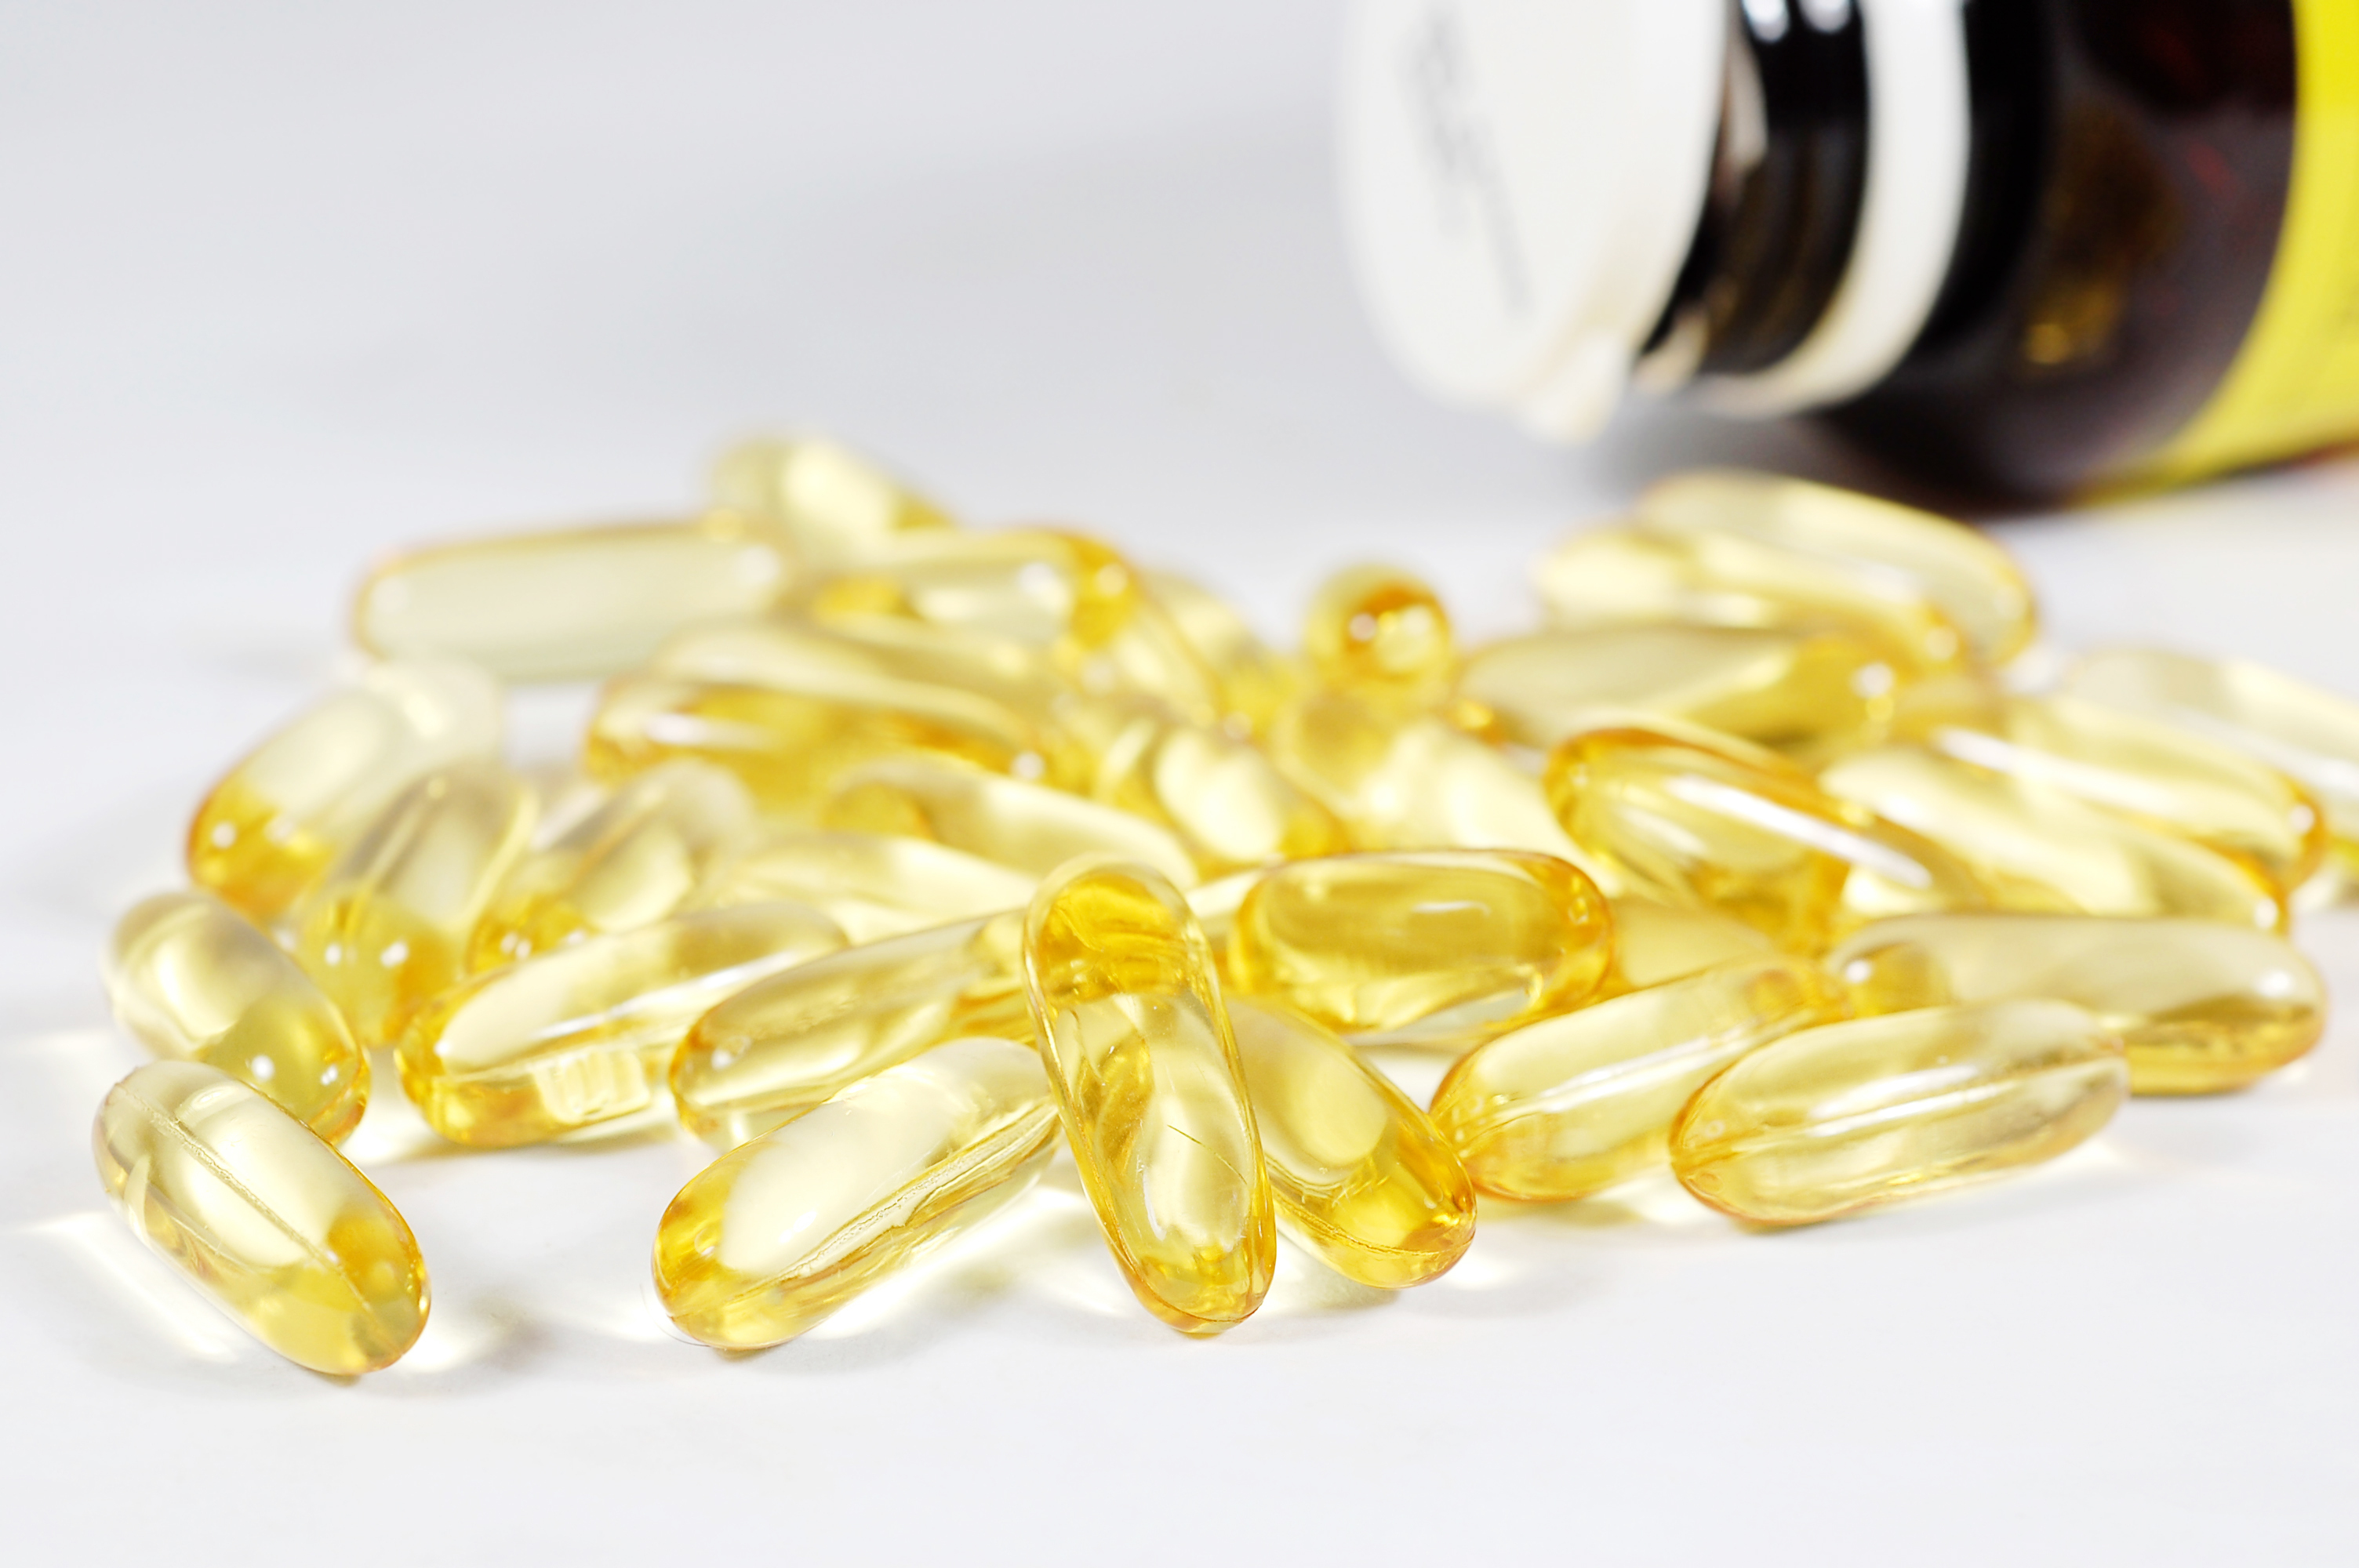 Asia Pacific Pregnant Women With Low Vitamin E Levels Have